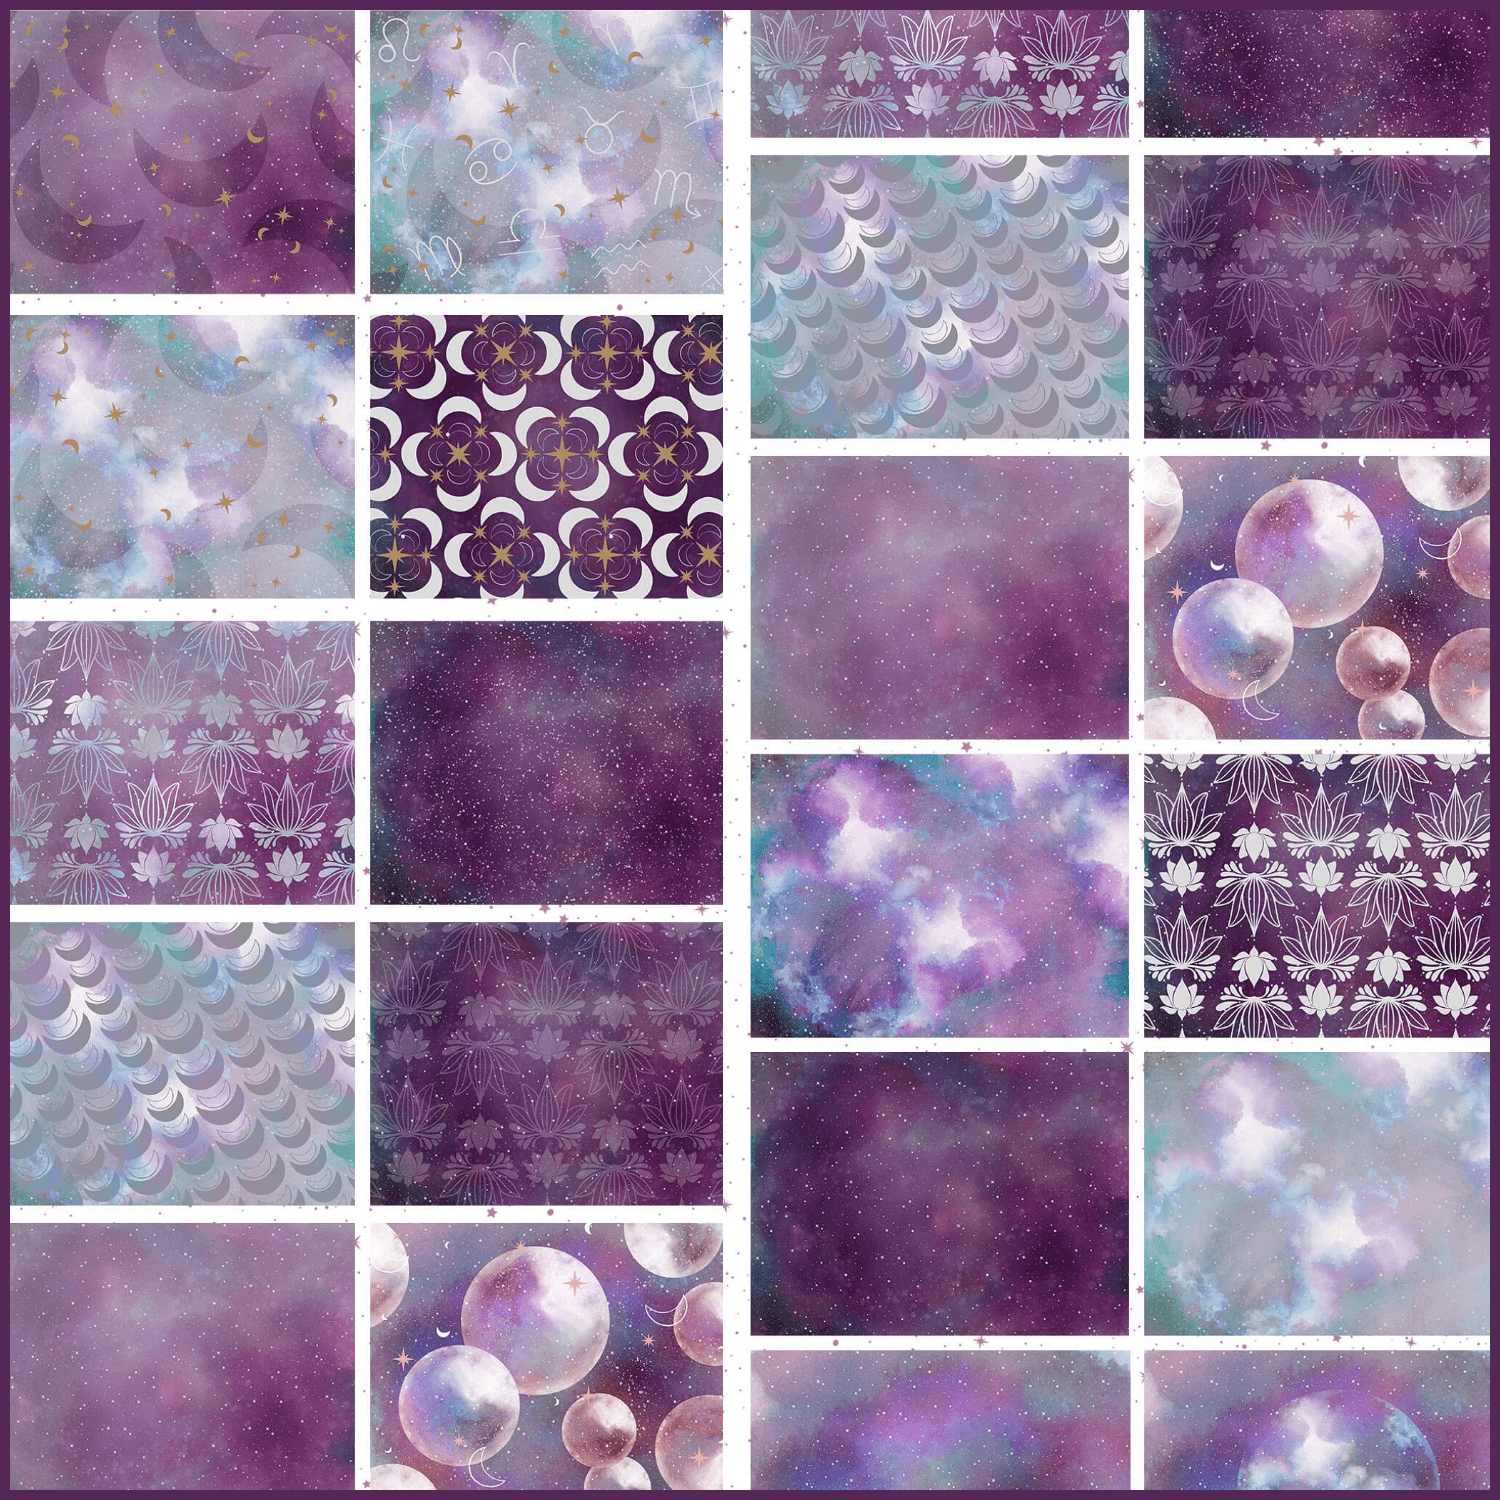 Galaxy Star Moon Patterns cover.